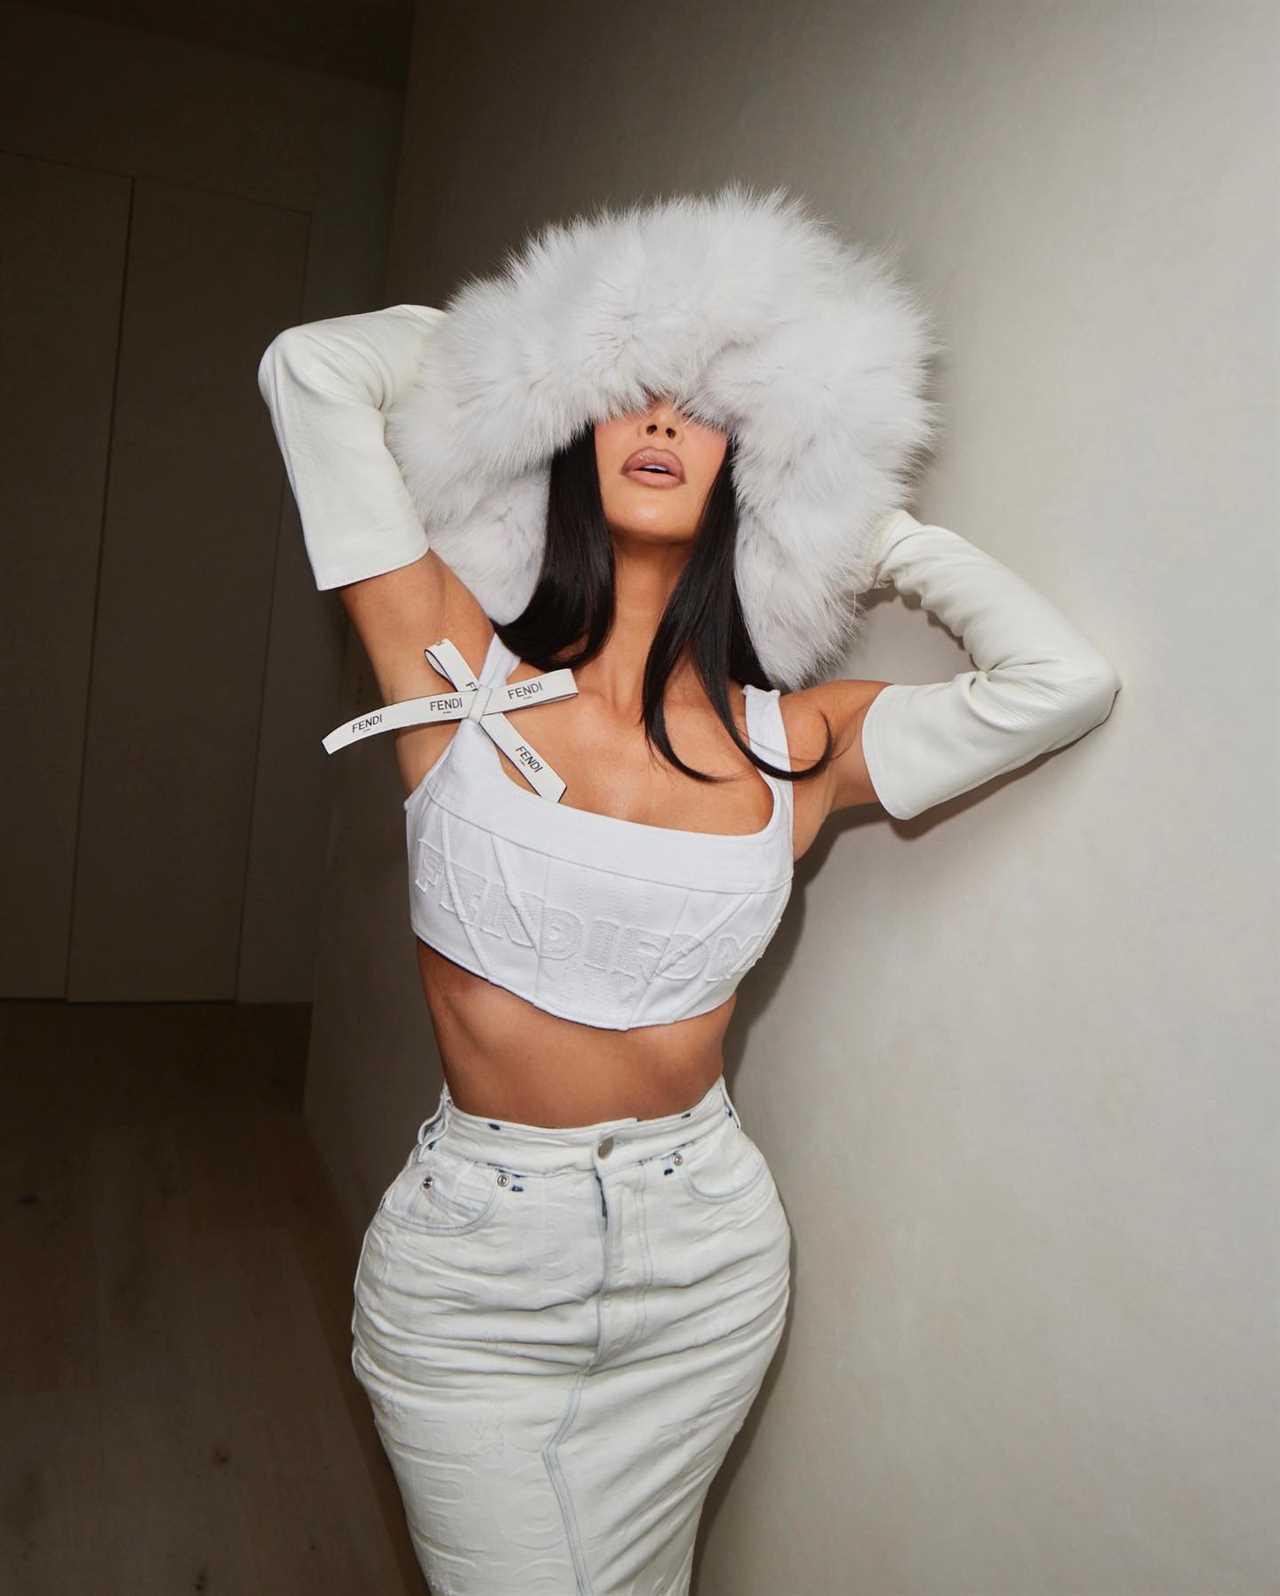 Kim Kardashian flaunts her ultra tiny waist in white crop top and denim skirt for new photos after major weight loss